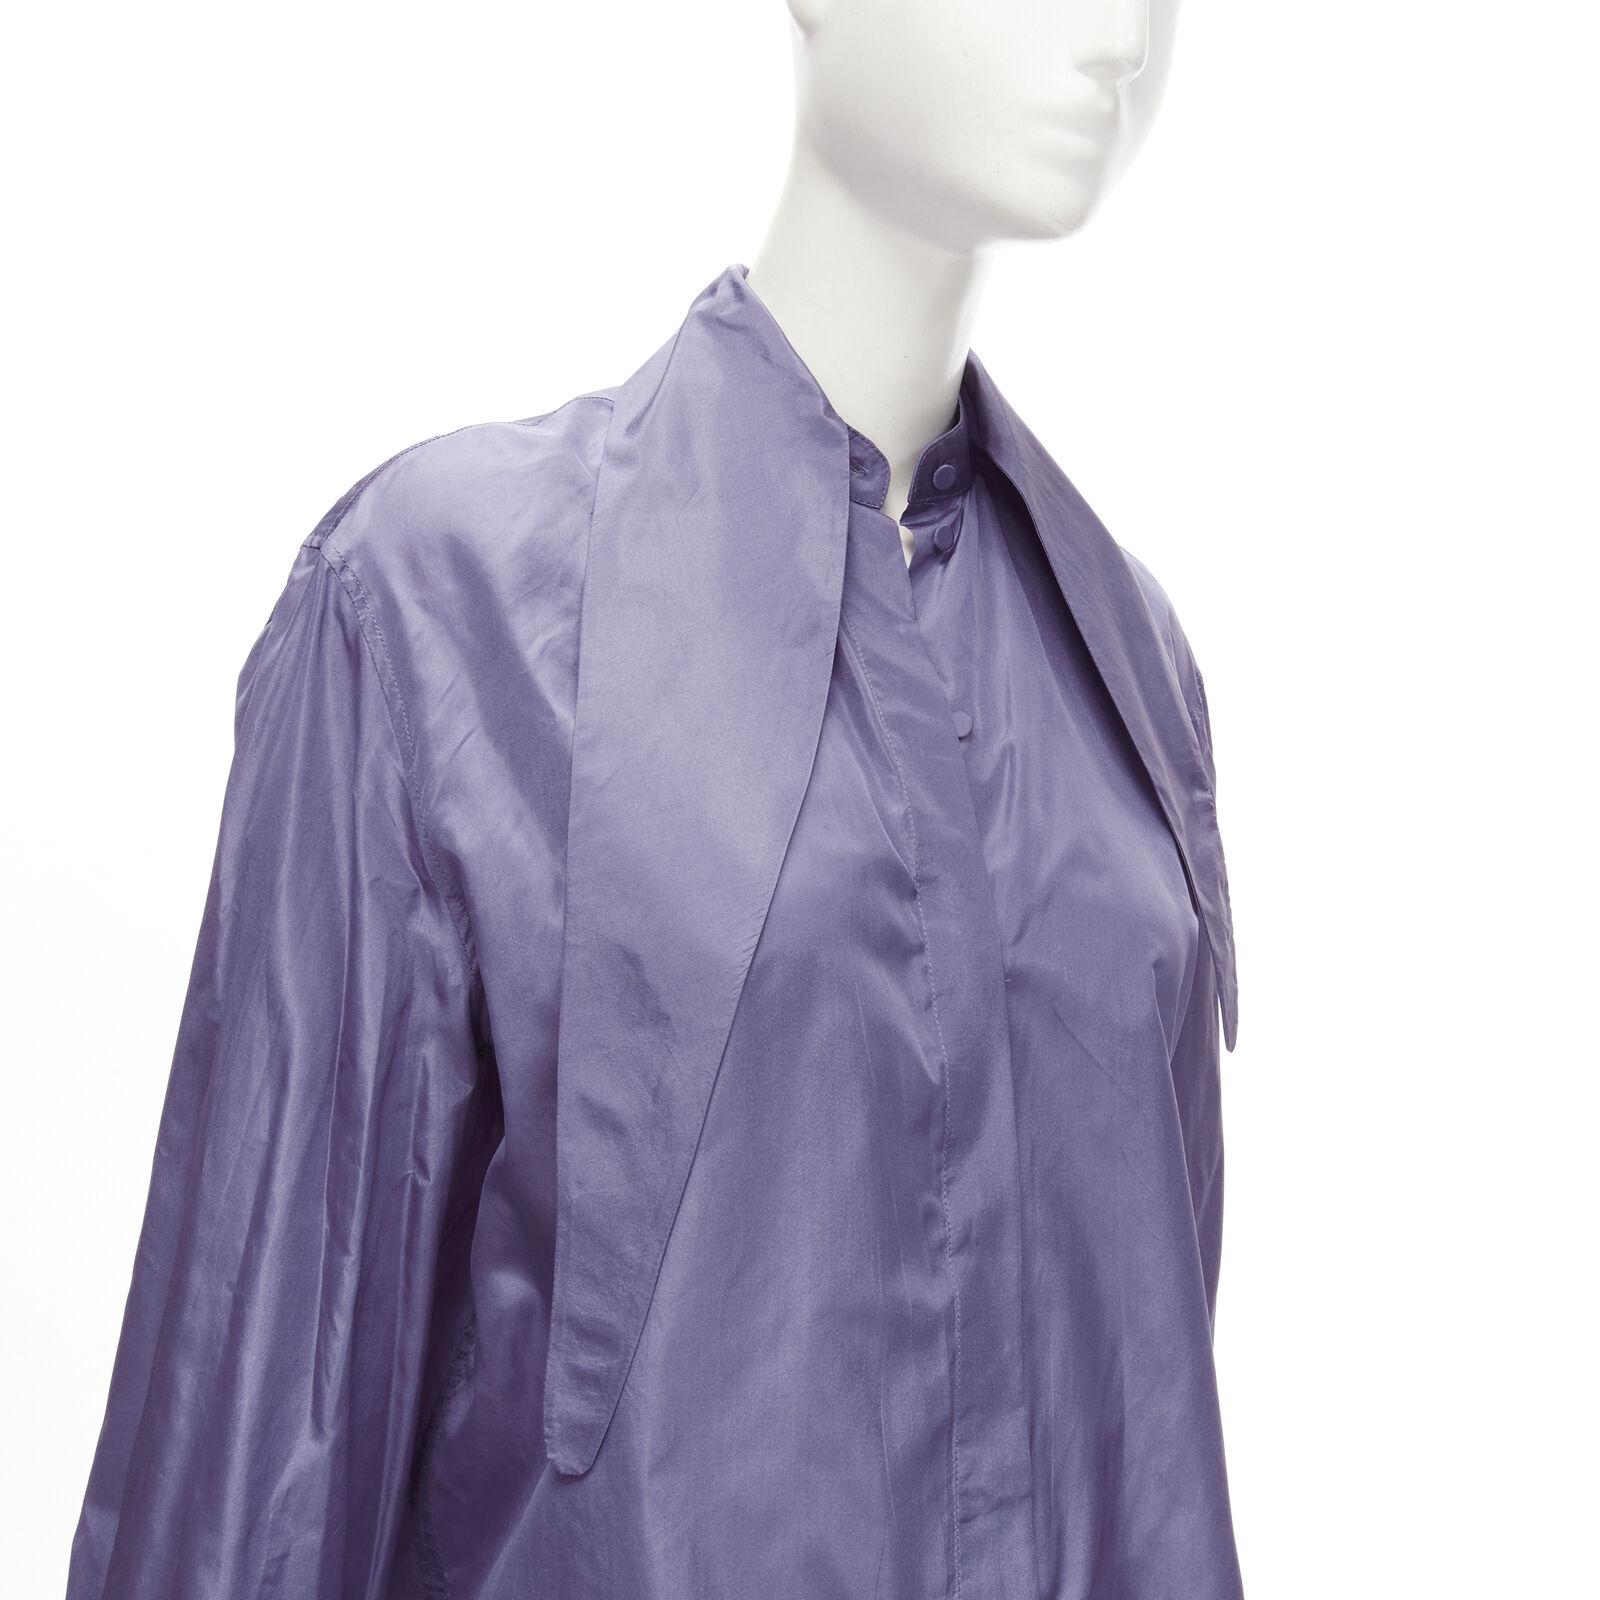 VALENTINO 2022 Runway purple lilac silk taffeta tie oversized shirt IT36 XS
Reference: AAWC/A00263
Brand: Valentino
Designer: Pier Paolo Piccioli
Collection: 2022 - Similar design on the Runway
Material: 100% Silk
Color: Purple
Pattern: